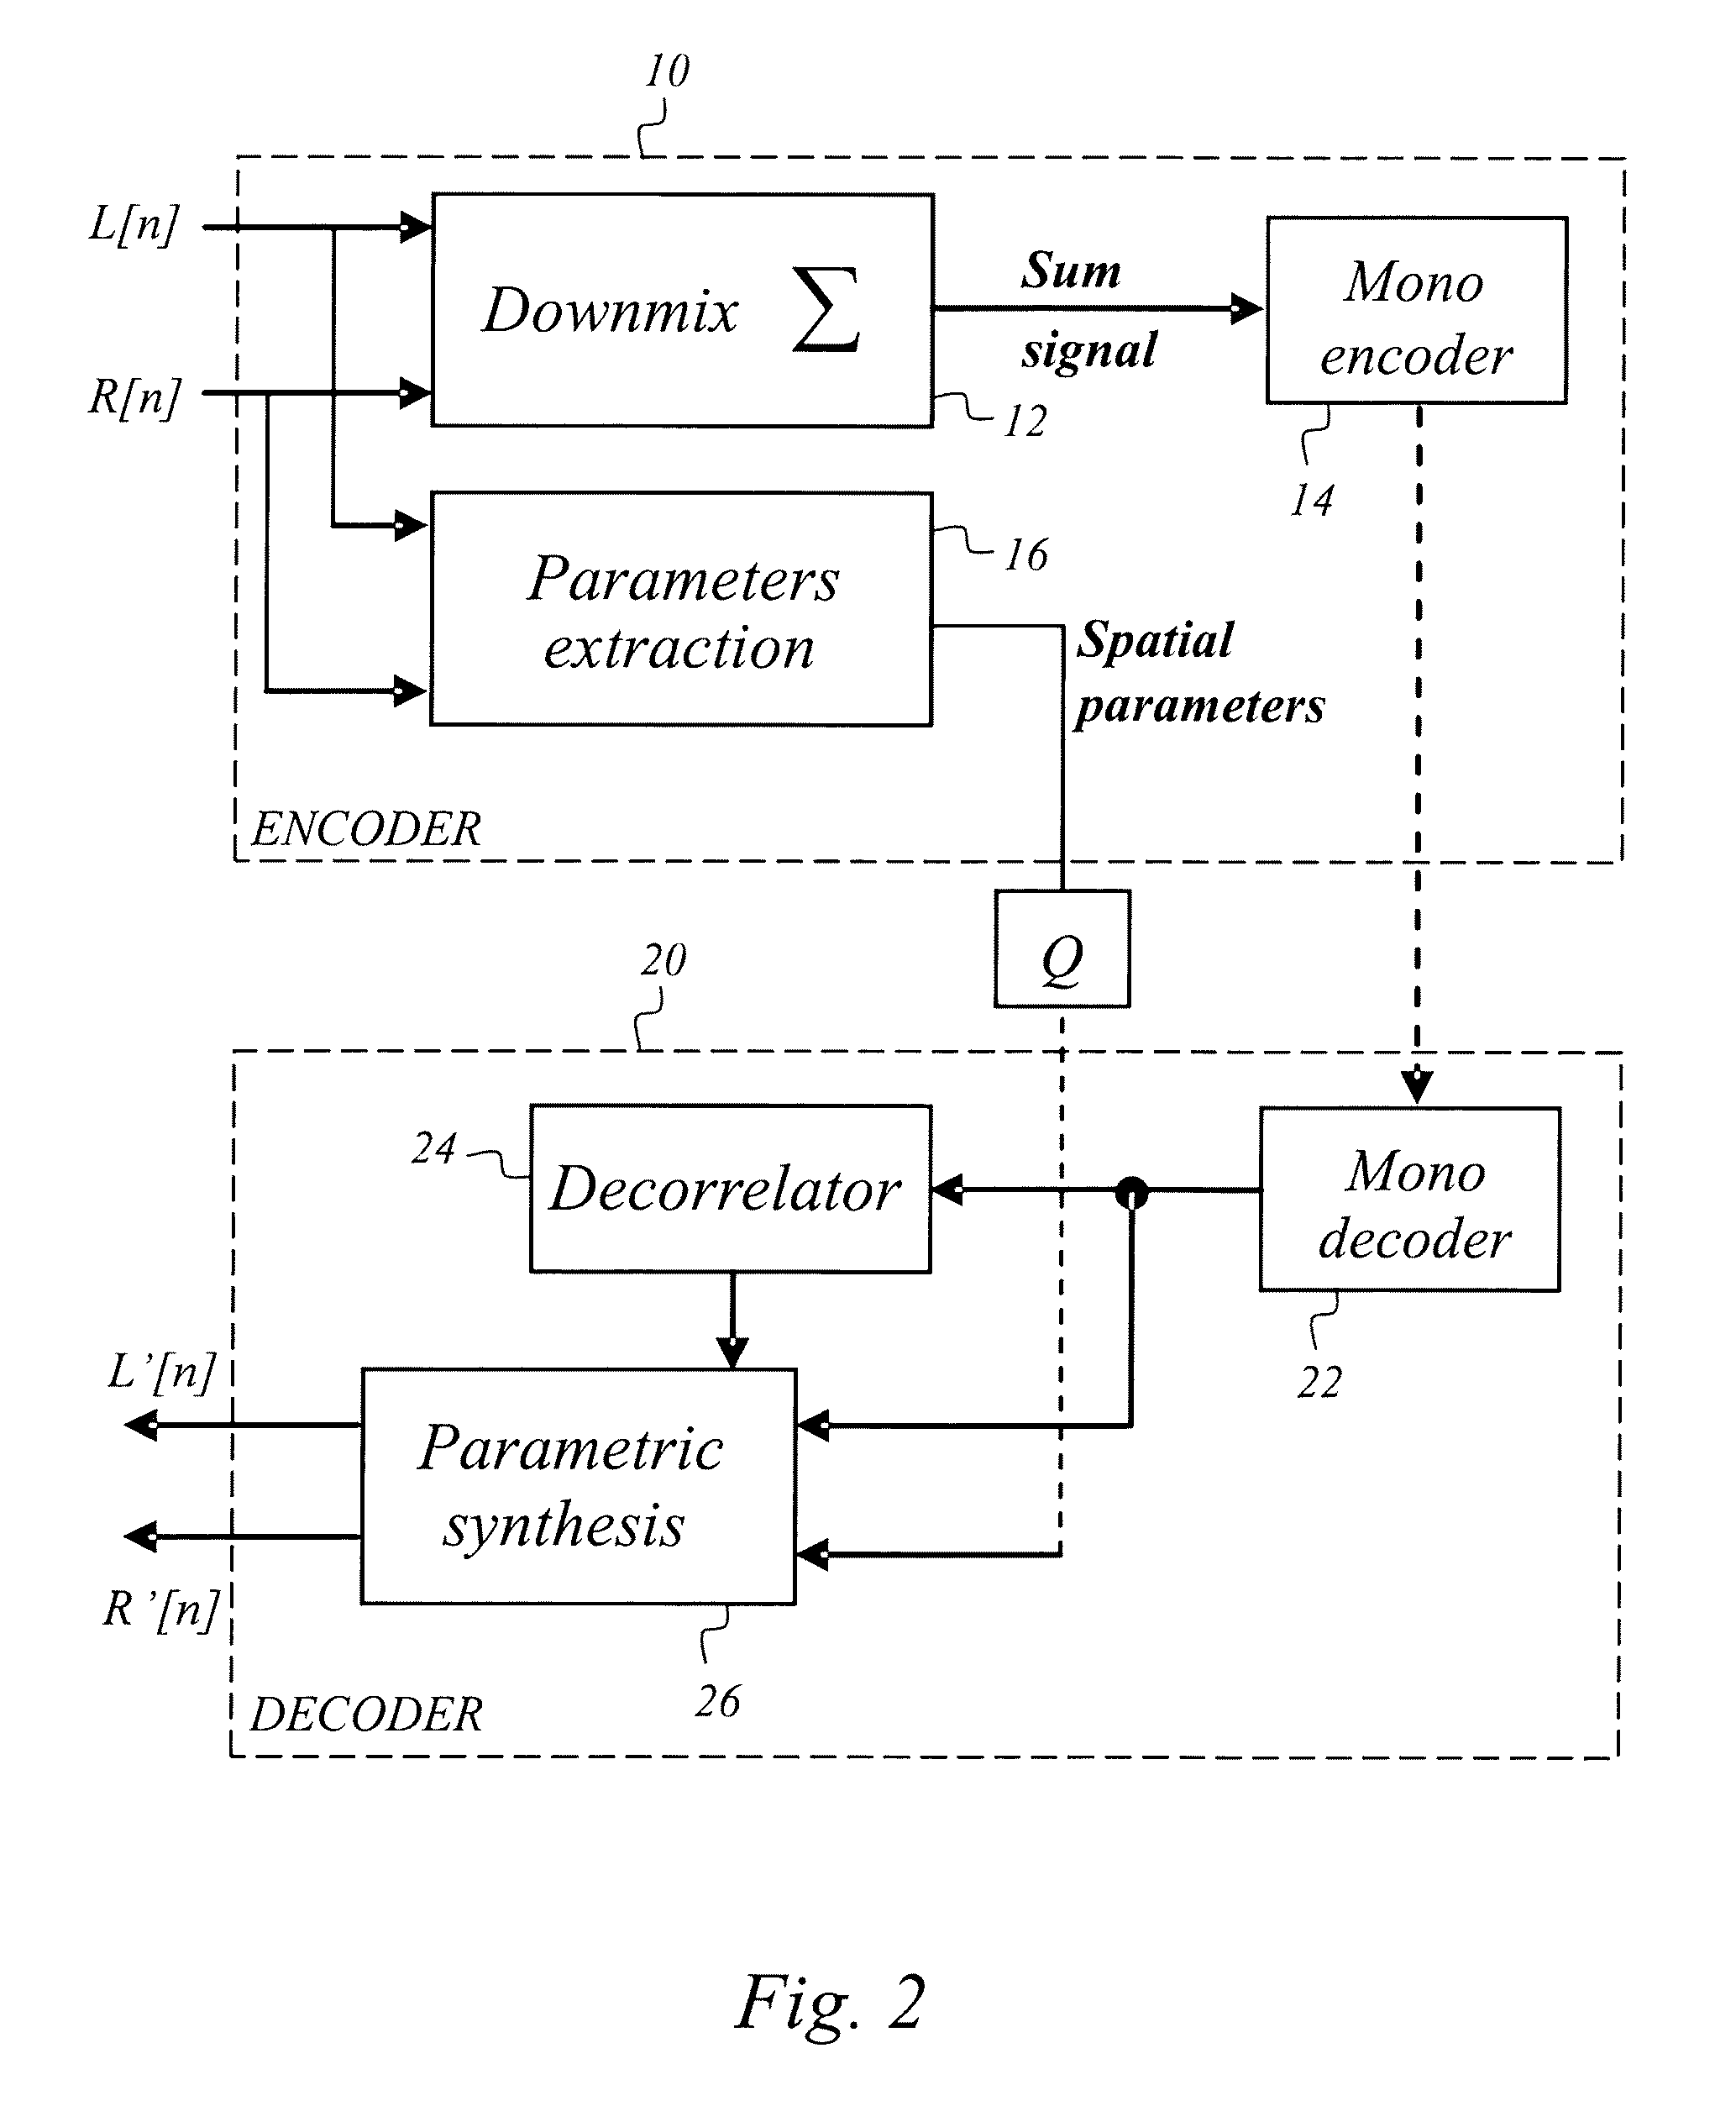 Determining the inter-channel time difference of a multi-channel audio signal